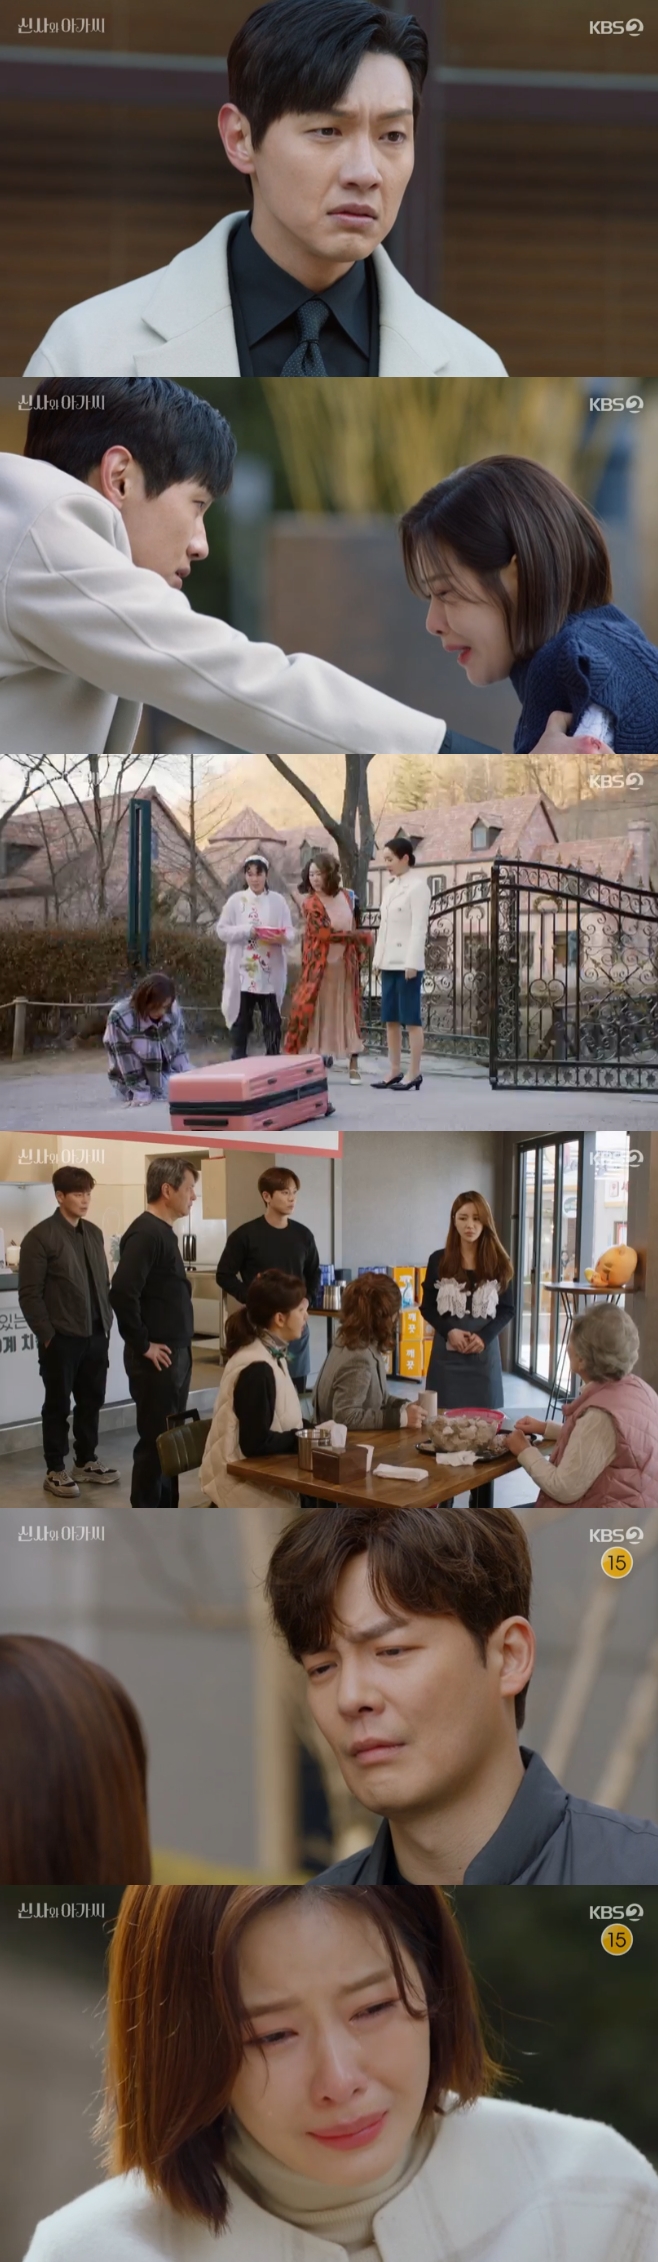 Gentleman and Lady Park Ha-na and Cha Hwa-Yeon were kicked out of the houseAll the truths were revealed in the 47th KBS2 weekend drama Gentleman and Girl (playplayed by Kim Sa-kyung and directed by Shin Chang-seok), which was broadcast on the evening of the 12th.On this day, Lee Young-guk (Ji Hyun-woo) regained all the memories and found out that the child of Park Ha-na was not his child.Nevertheless, Lee Young-guk, who is angry at the investigation that continues to lie shamelessly in front of him, said, How do you do this? Still, you will insist on my child.Now no more lies work - Im Memory back, he shouted.The investigation immediately fell to his knees and said, It is not your child. I am wrong. I am guilty of death. Lee said, Why did you do this?Have I given this to Chief Joe once in a while? Have you ever wanted it? Did you do this to get revenge on me? So, when Josa said, I liked you, and I wanted to be next to you. Lee said, Thats why. Thats it. What?Youre a crazy woman, she replied.All the truth was revealed, but Lee Young-guk could not return to Park Dan-dan (Lee Se-hee), because his sorry heart still remained.Is it meeting with Mr. Dan again? he said, I left the problem of the chief of staff and Park has experienced too many things that the young girl will not have to go through with me.I do not want to get caught up in my life anymore. It is right to just let it go. The people around him also learned the truth: Wang Dae-ran (Cha Hwa-Yeon), who had believed in Josara, scrawled his cheek and said, What kind of man is not even in this mess?How do you change your seed? Ive been a concubine all my life, but I never thought of you. Youre not a person.Park Soo-chul (Lee Jong-won)s family heard the news, but decided not to tell Park Dan-dan. Park Soo-chul said, Its a secret to Dandan.Even if you know later, it is not now. He continued to oppose the meeting of the two people.The biggest injury to Josaras lies was the childs paternal chaegun (Kang Eun-tak), which was used as a lie. Chagan said, How can you do that with my child?This is wrong. You cant just say it. You cant say it now.What did you do this for? and Josa said, We wanted Sejong (Seo Woo-jin) to be next to me.When Sejong was a baby I threw it in front of the chairmans house, so Sejong wanted to be next to him so he tried to marry the chairman.Sejong wanted to be a mother. He said, Can you do this? What is wrong with my child?You are a bad woman, he said.Soon after, Park and Lee were reunited at an event, where Park said, How are you? Dont worry about me. Im doing really well.I thought it would be a lot harder to break up with the president, but Im doing better than I thought.So I hope you are well with the president. He replied, pretending to be okay.He looked at Lee Young-guk sneaking home and crying, Im not really okay, Im not okay a lot.In addition to the investigation, the king was also kicked out of Lee Young-guks house.Lee Young-guk also learned that it was the kings war that he lied to Lee Young-guk about being a lover when he lost his memory.In the end, Wang Dae-ran was kicked out without getting anything and asked Lee Se-ryun (Yoon Jin-yi) for help.